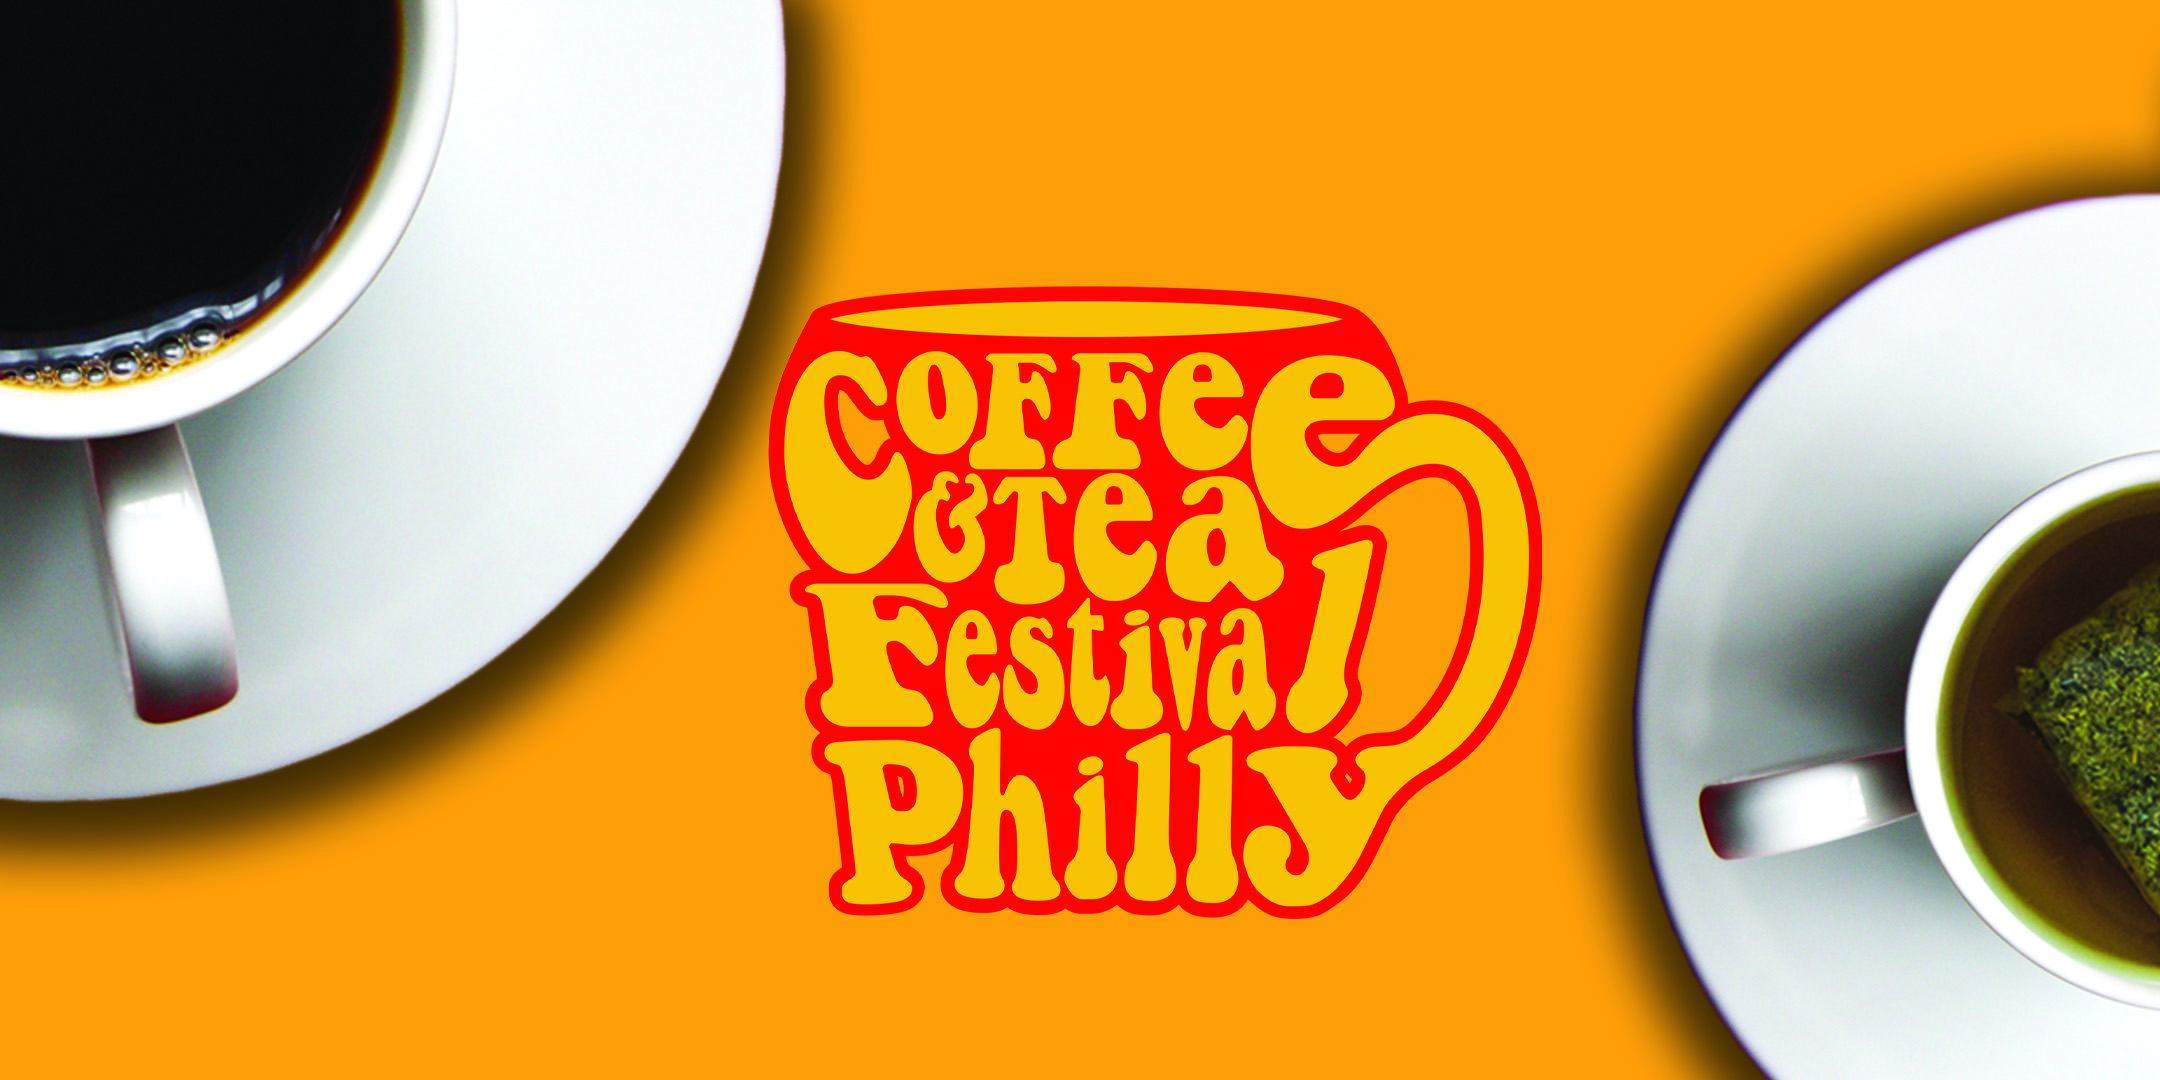 Coffee and Tea Festival Philly: 10/24/20 - 10/25/20